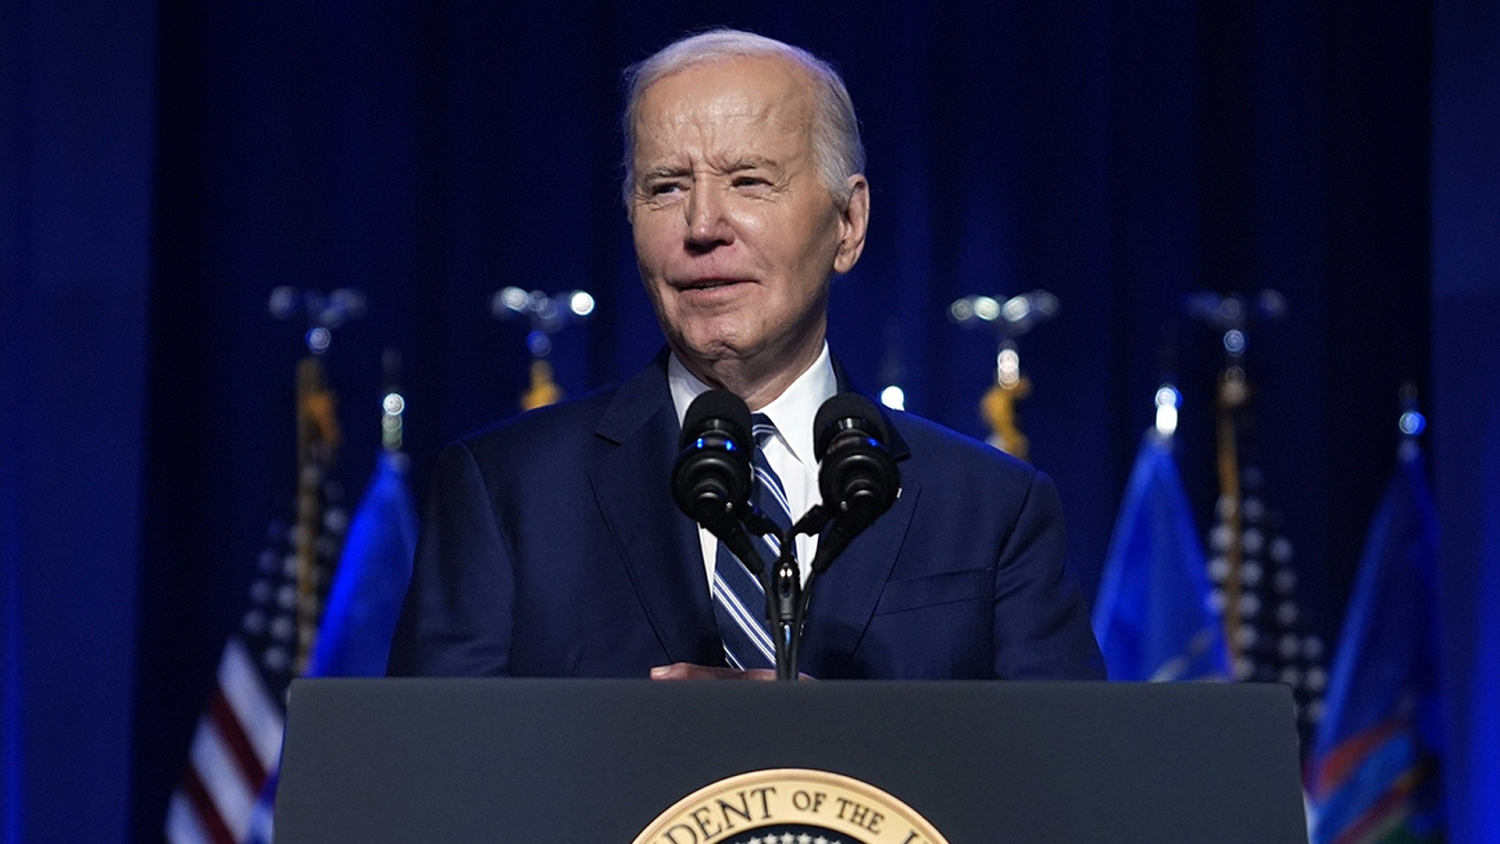 Biden ramps up attacks on Trump in show of shifting strategy